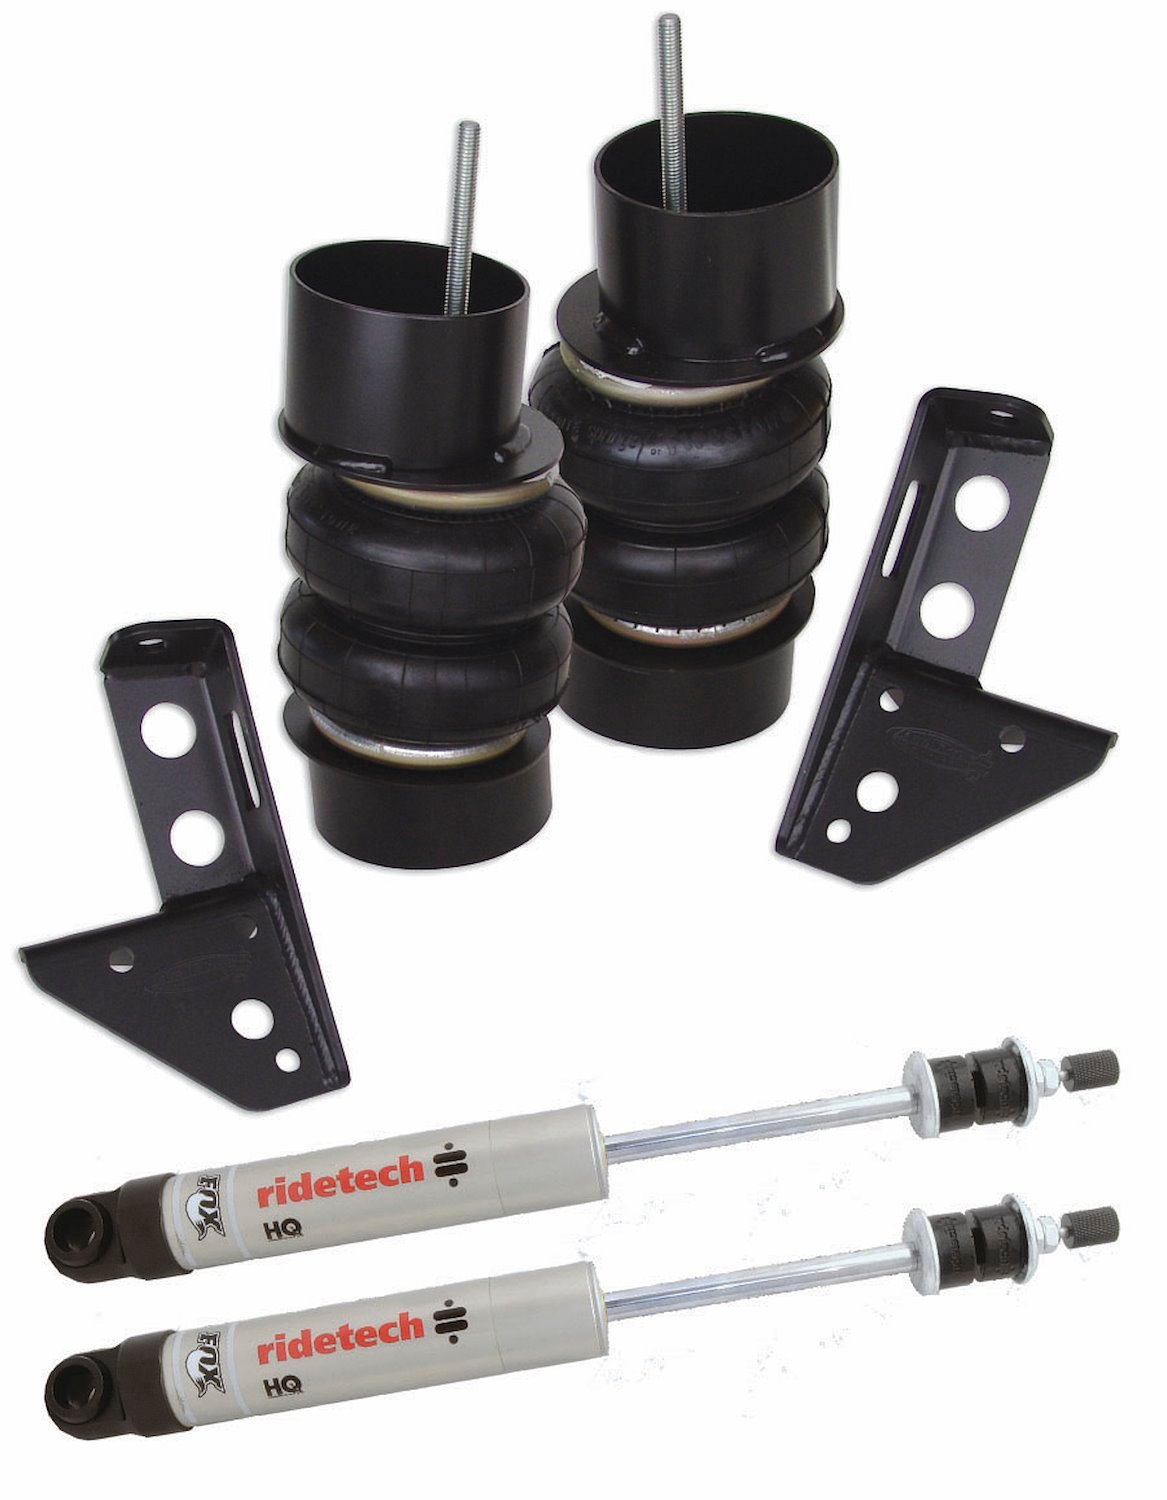 Front CoolRide kit for 82-02 S10. For use w/ RideTech lower arms. Includes air springs/ brackets/ HQ